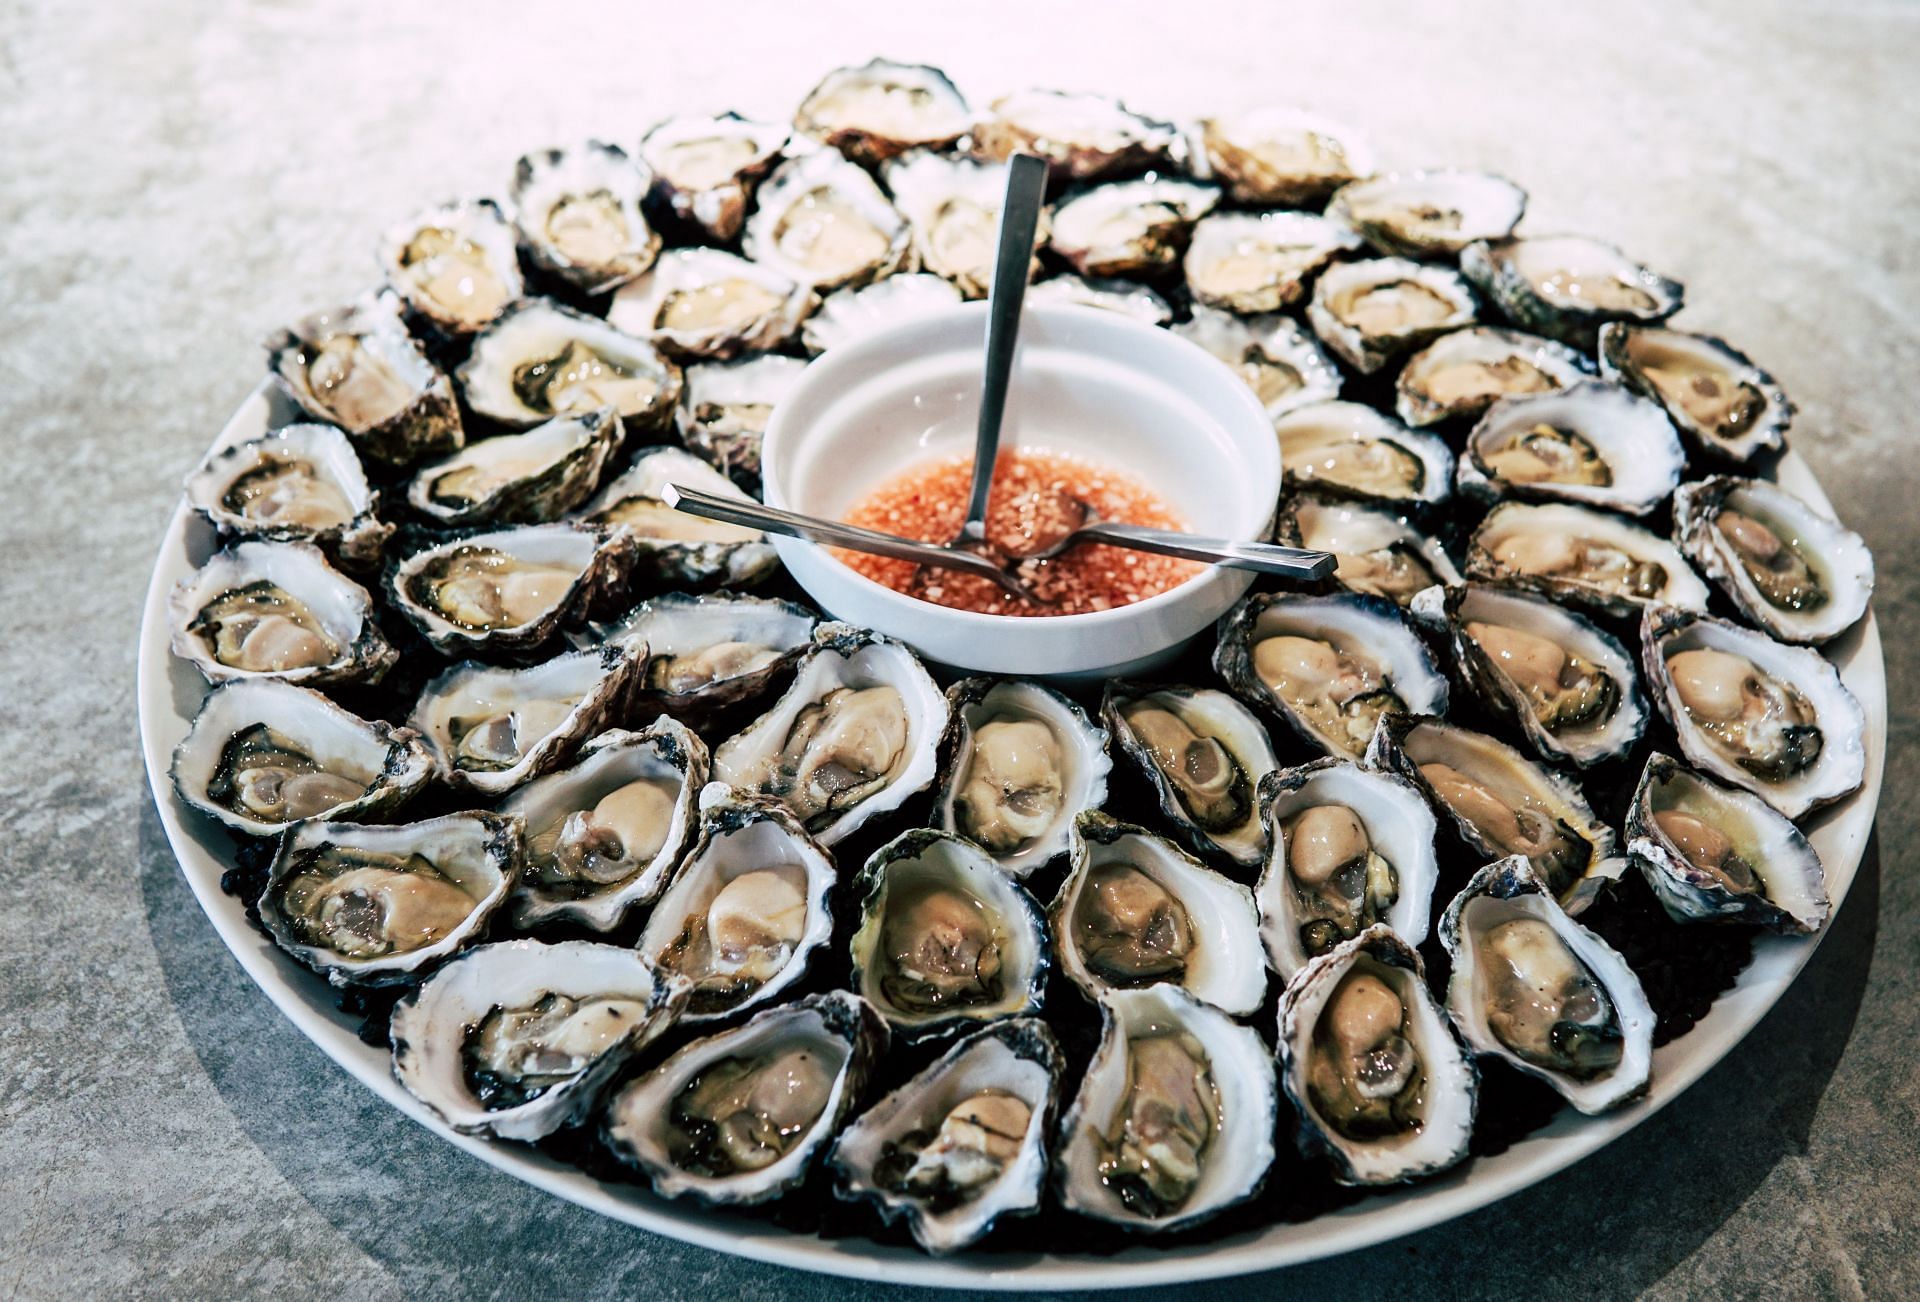 Oysters are rich in zinc. (Image via Pexels)